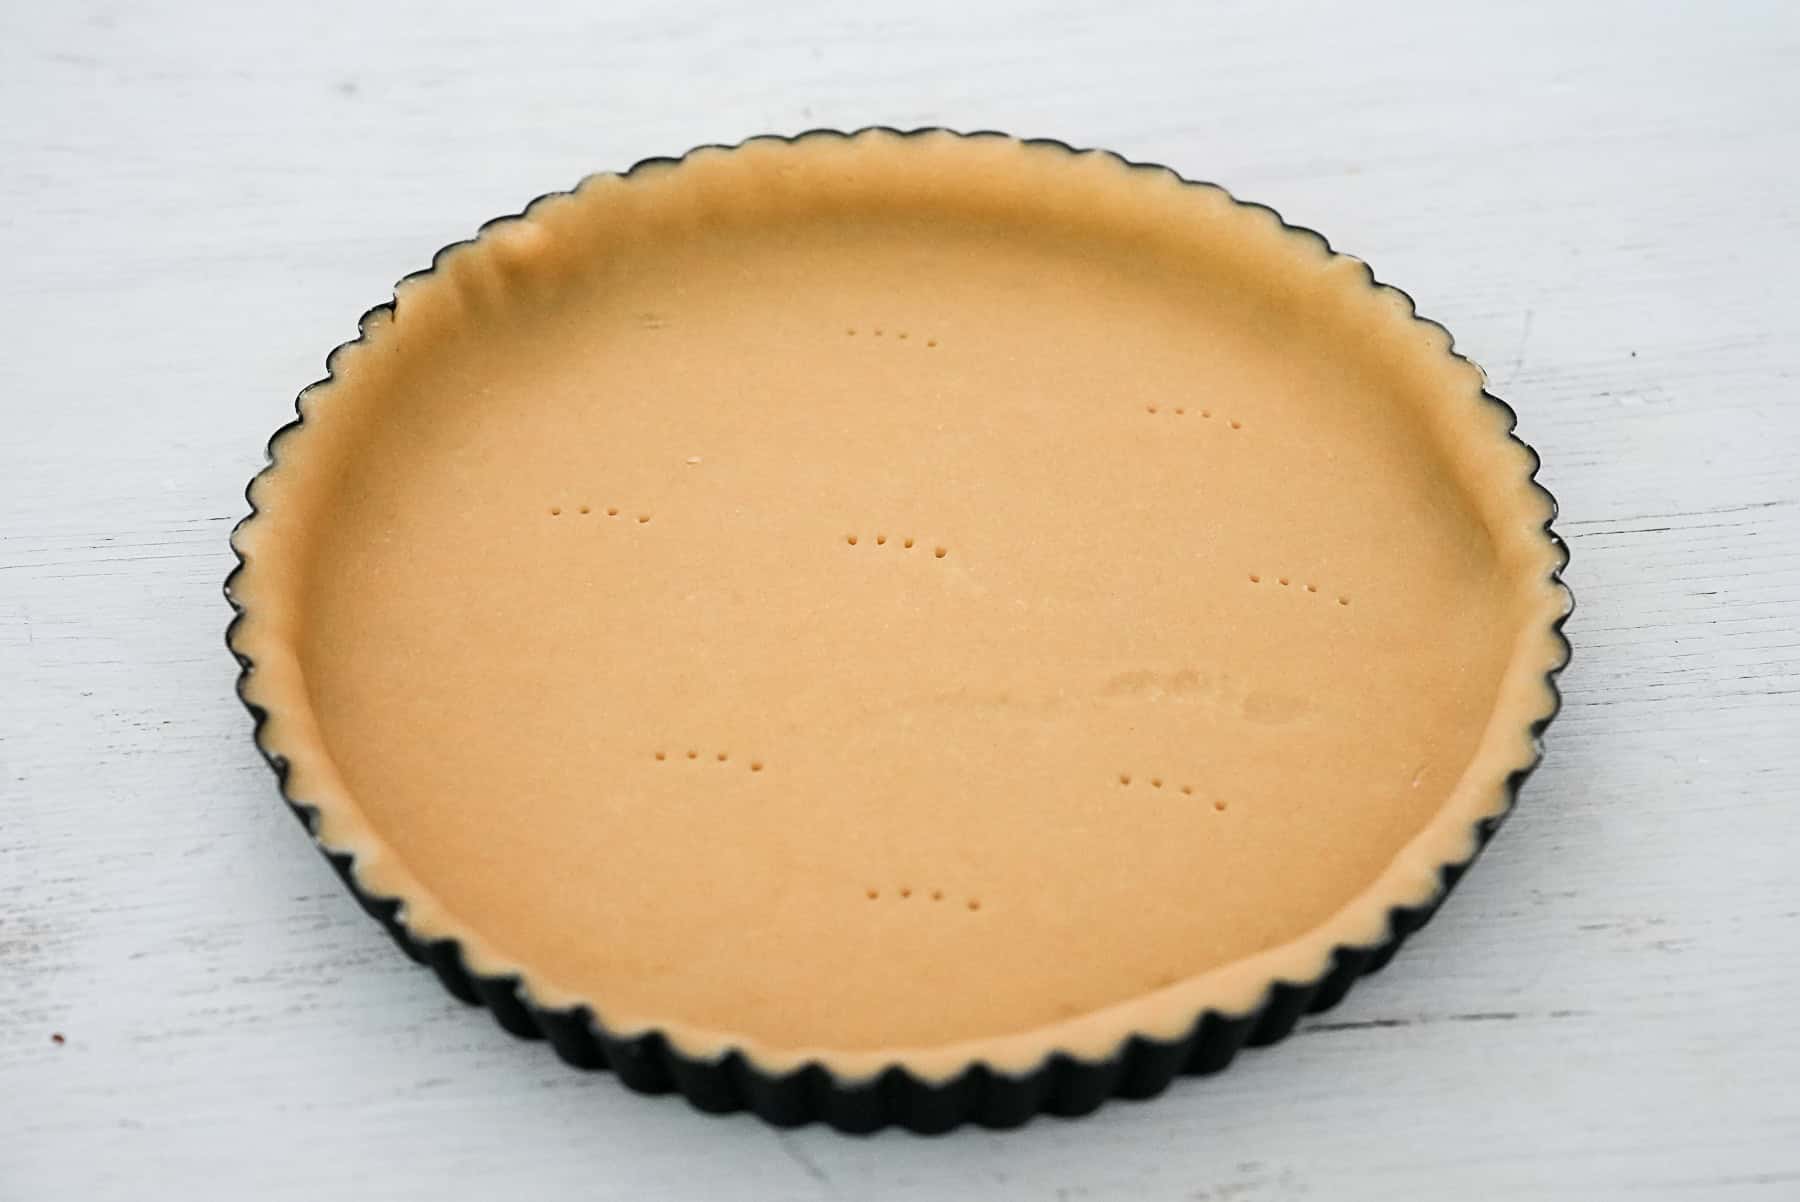 Roll out dough and fill tart pan